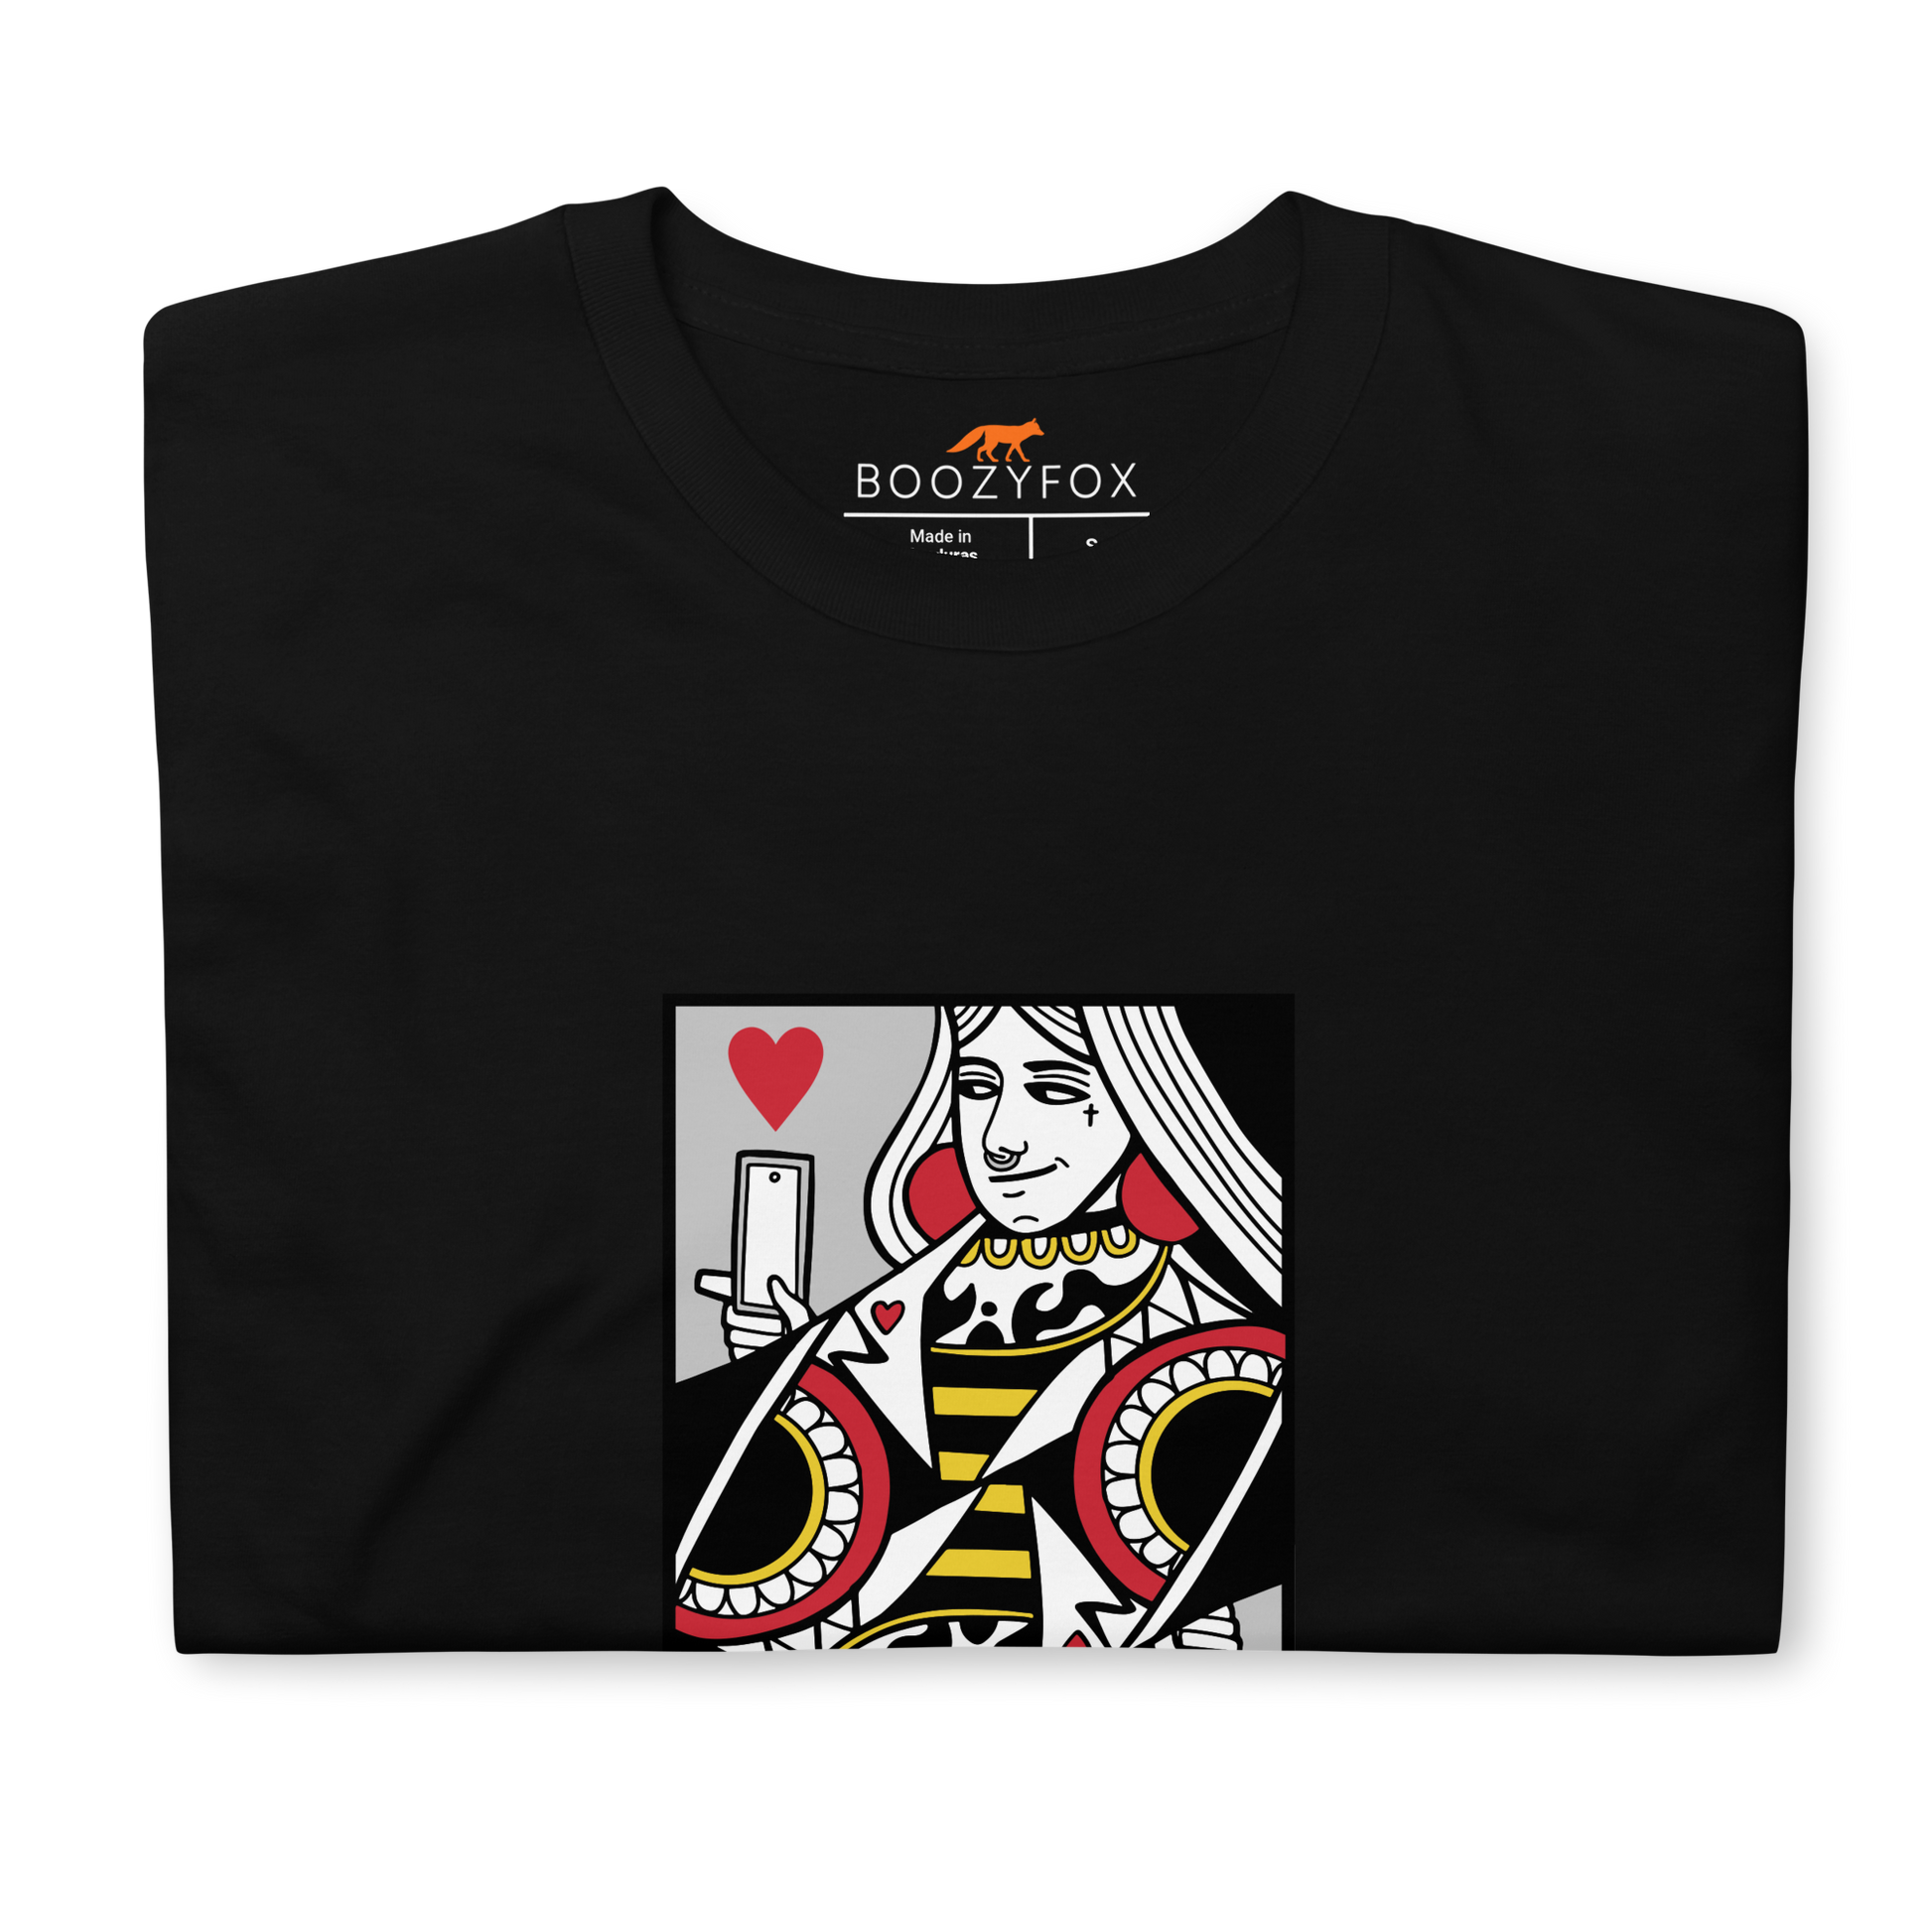 Front details of a Black Queen of Hearts Playing Card T-Shirt featuring a cool Queen of Hearts graphic on the chest - Cool Graphic Queen of Hearts Playing Card T-Shirts - Boozy Fox